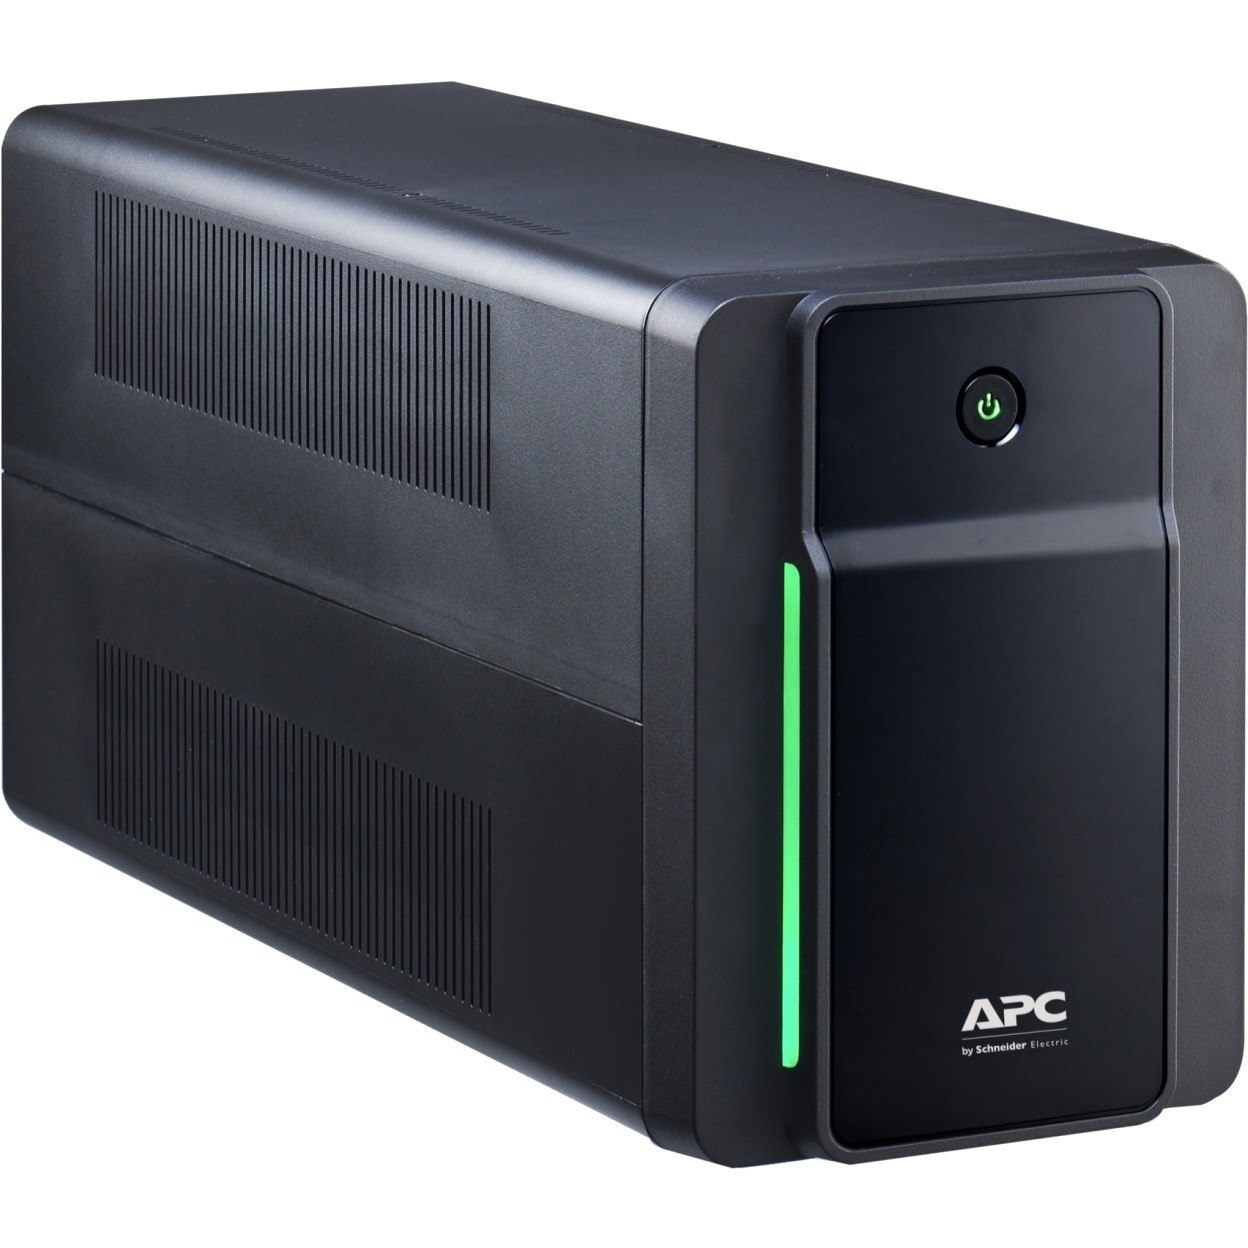 APC by Schneider Electric Back-UPS Line-interactive UPS - 1.20 kVA/650 W